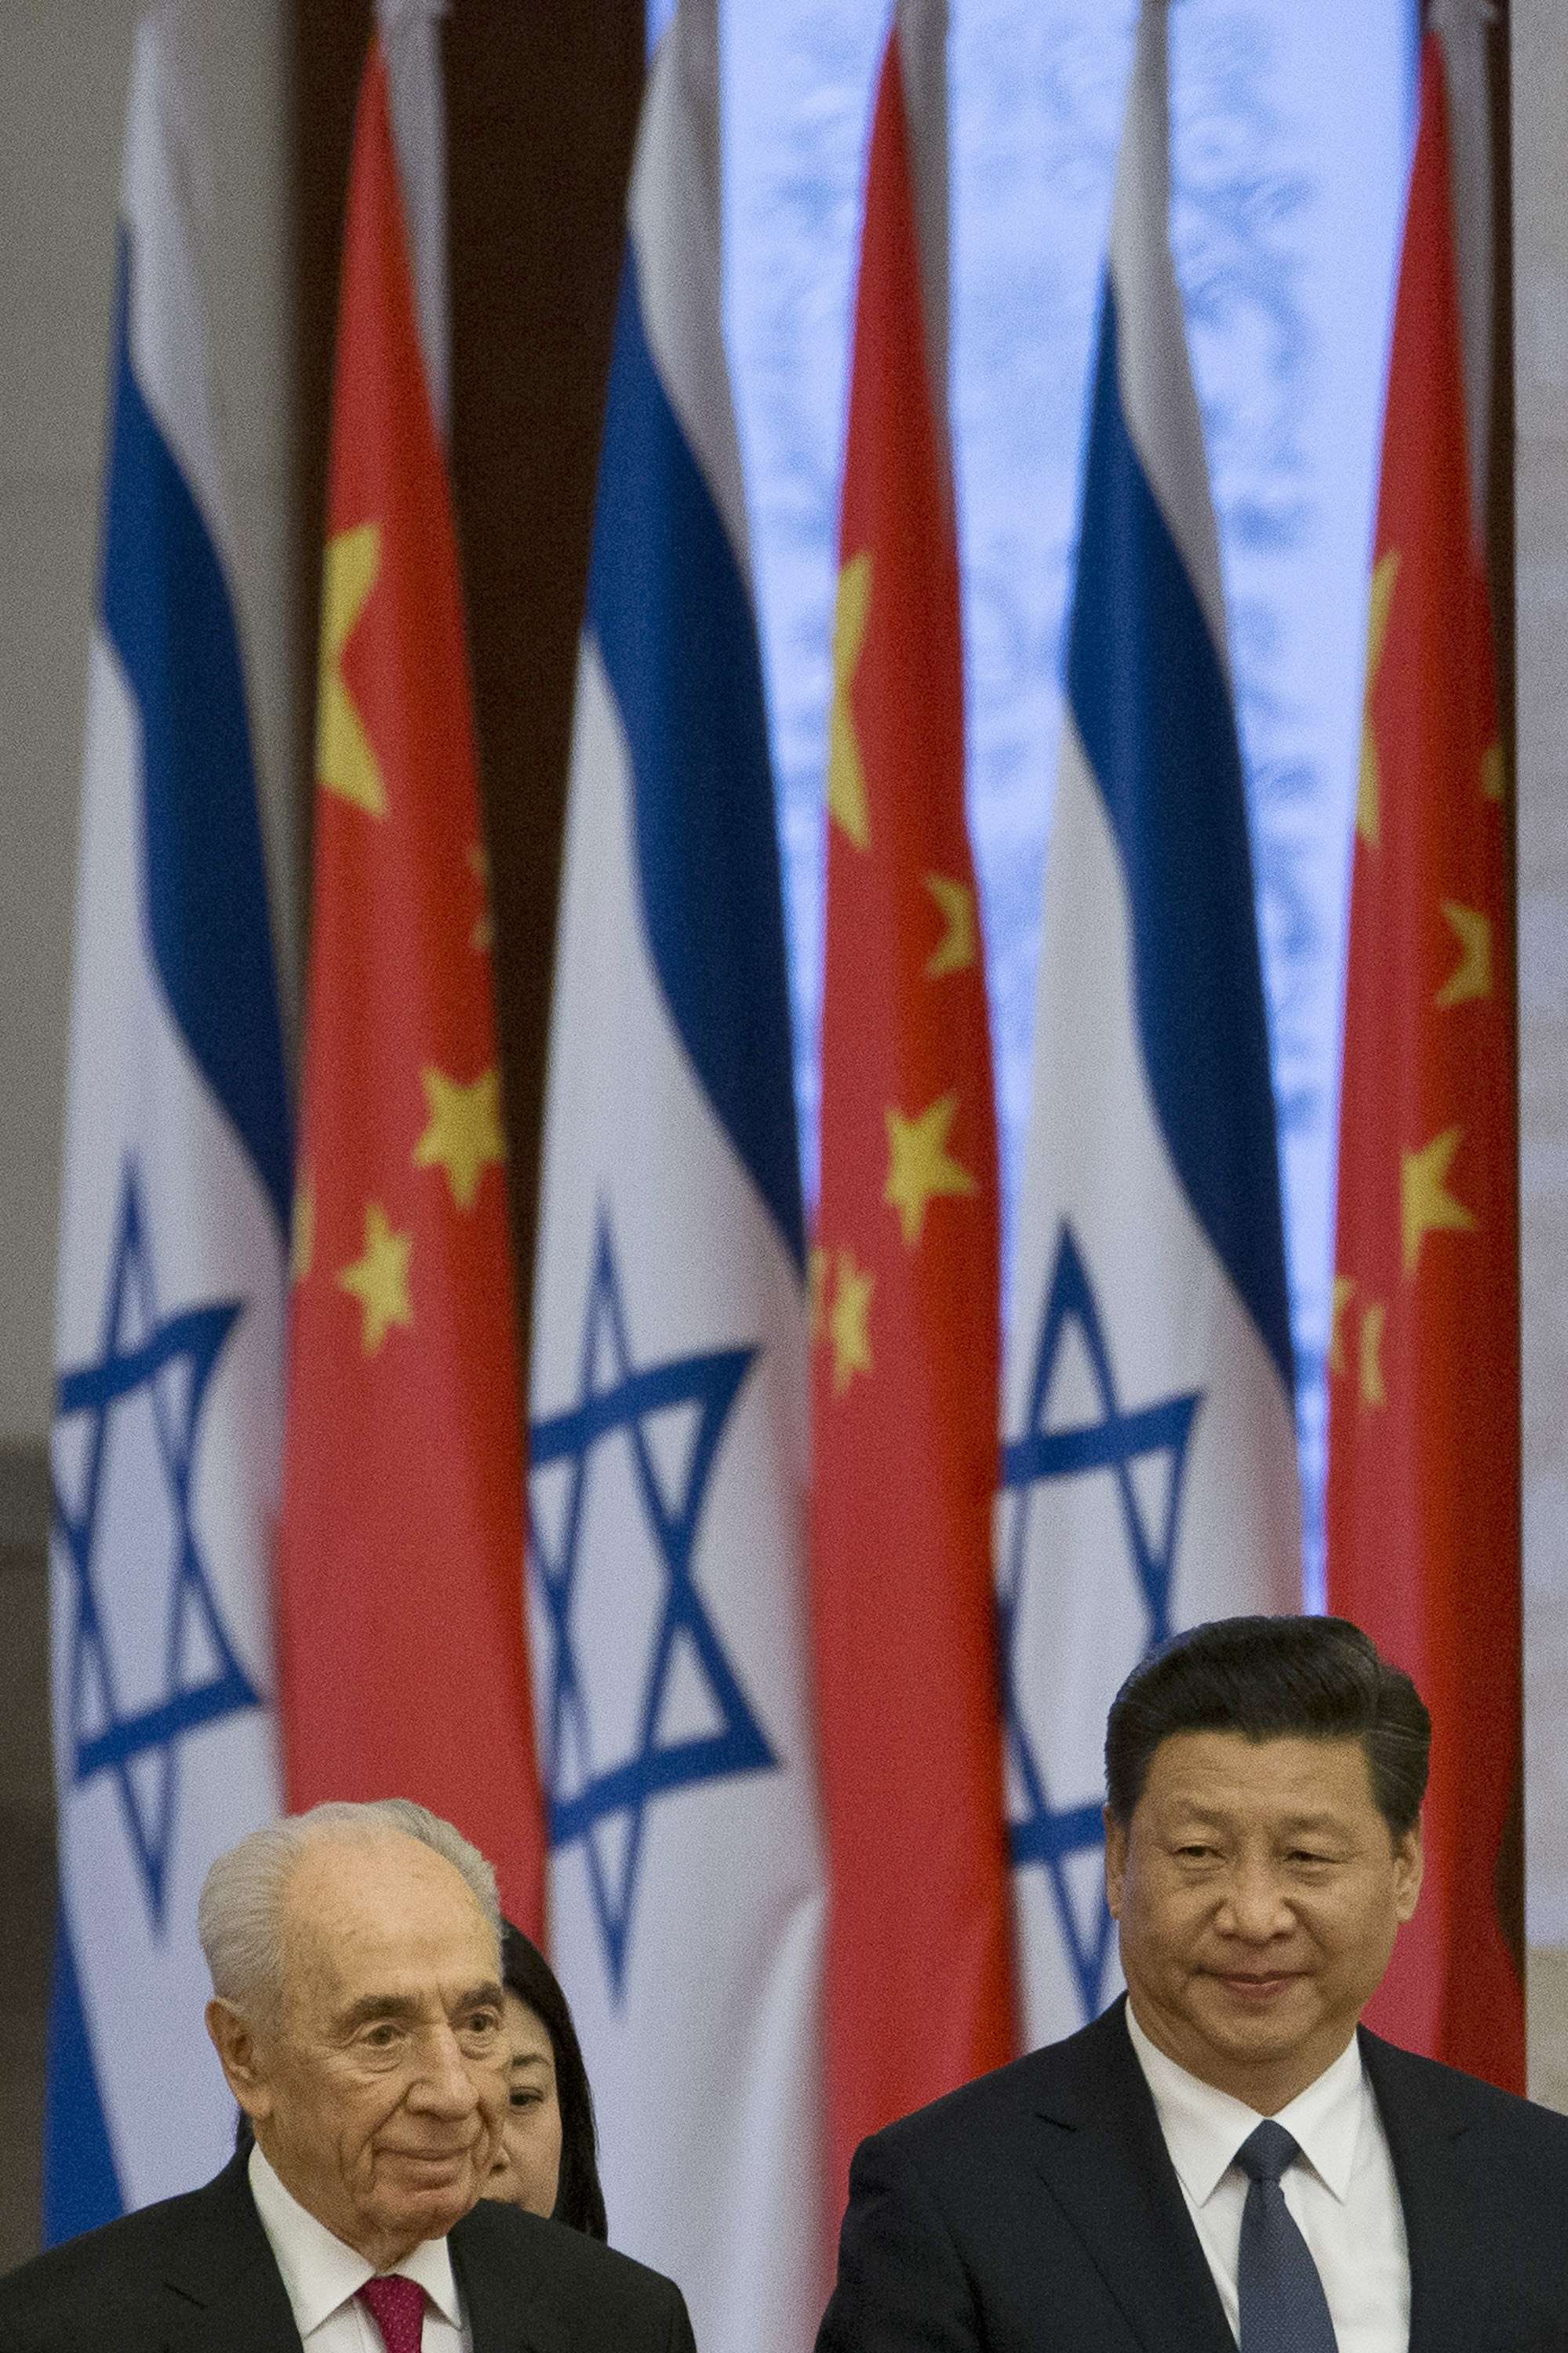 Chinese and Israeli flags. Photo AP, Alexander F. Yuan